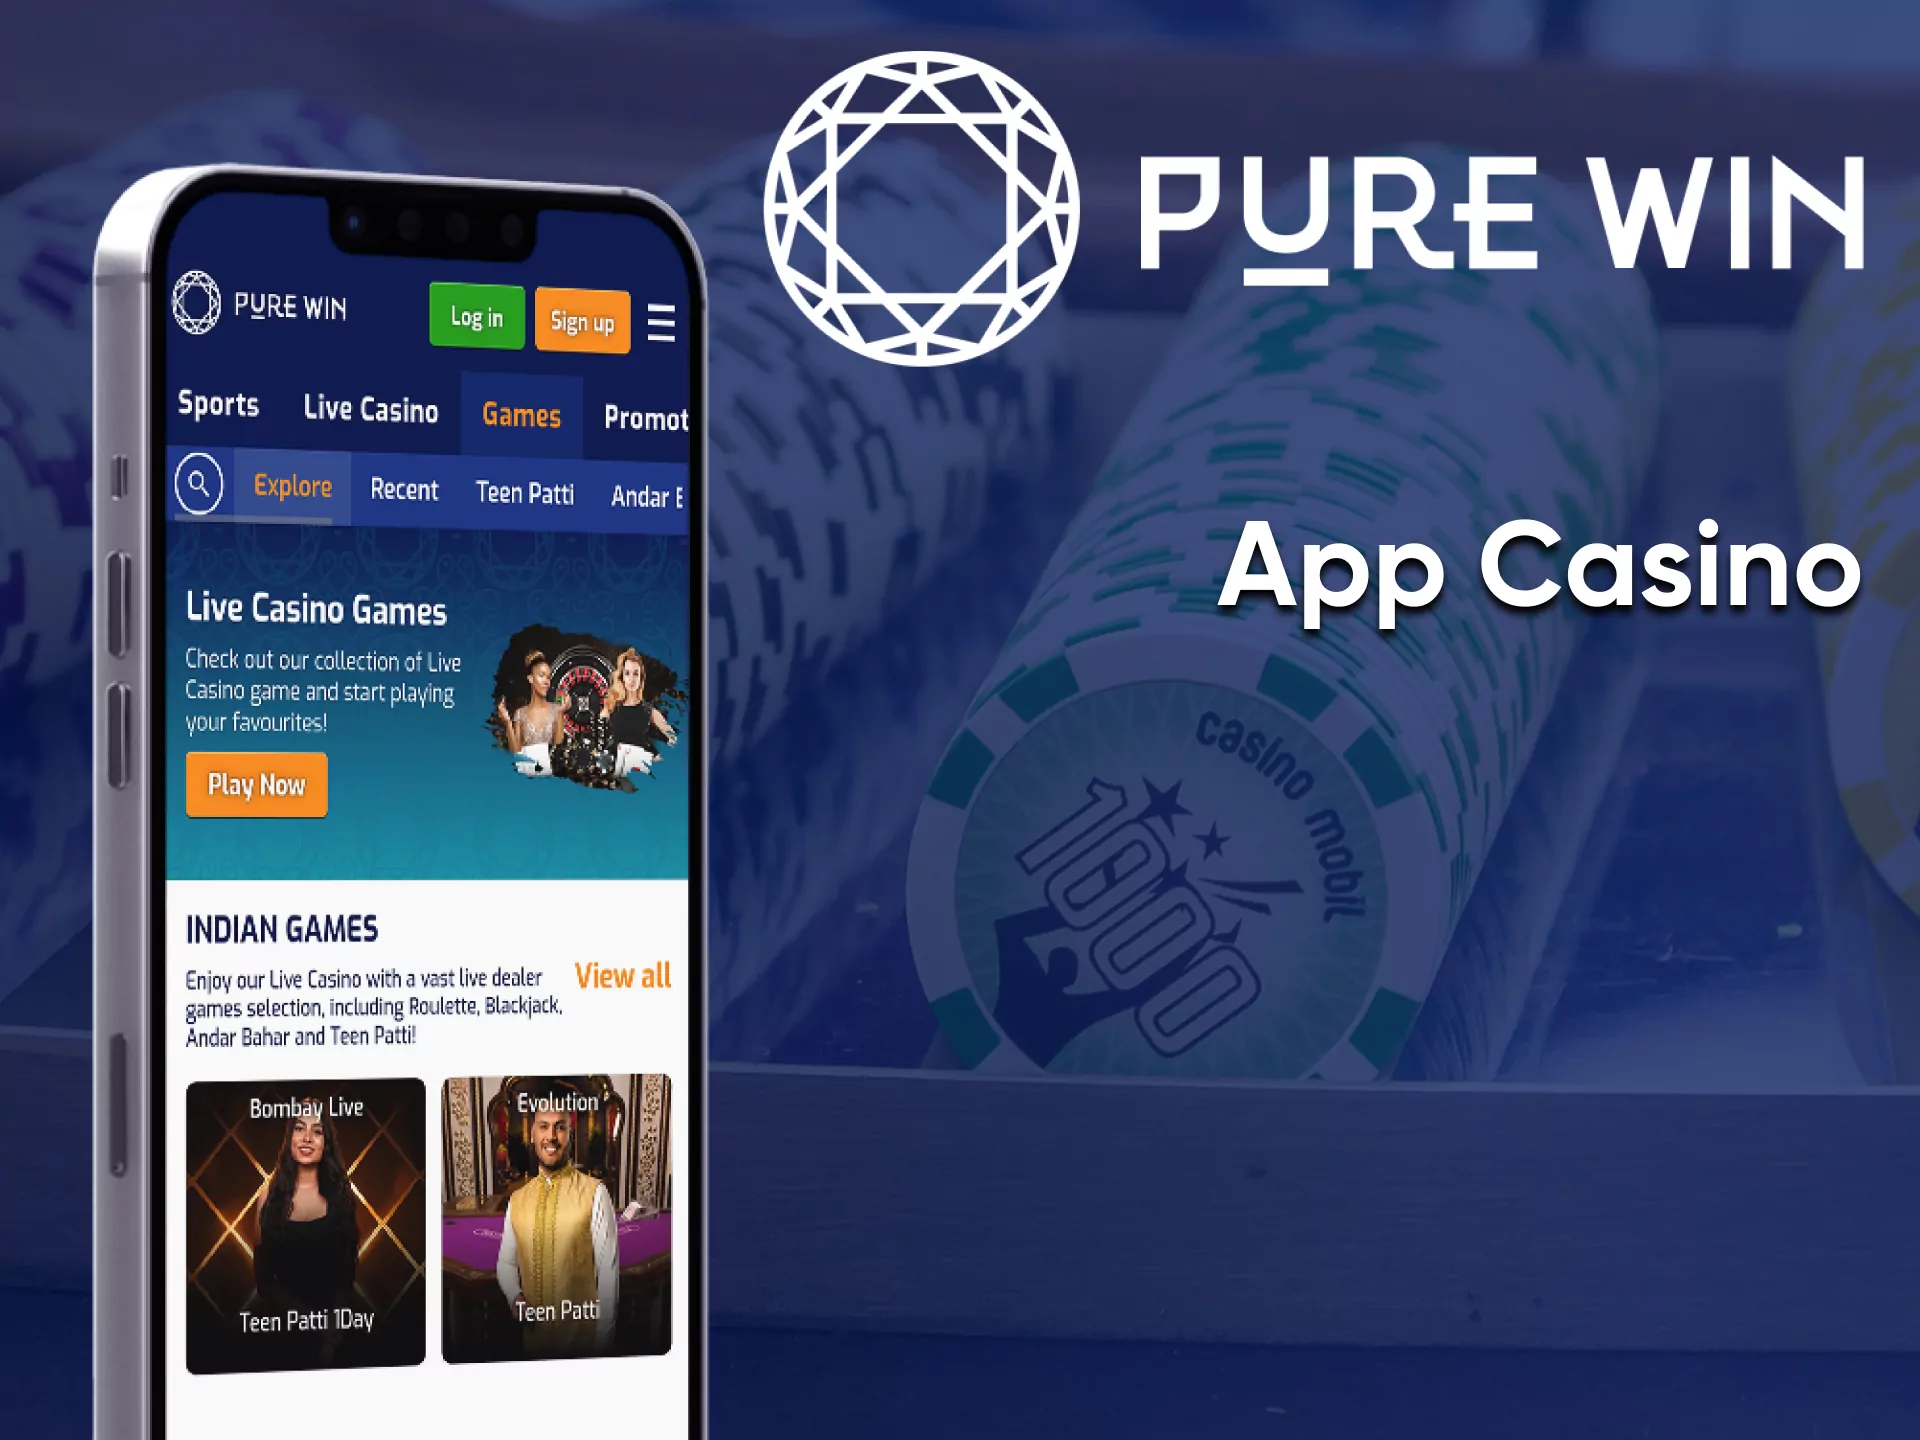 Go to the desired section and play at the casino from Pure Win.